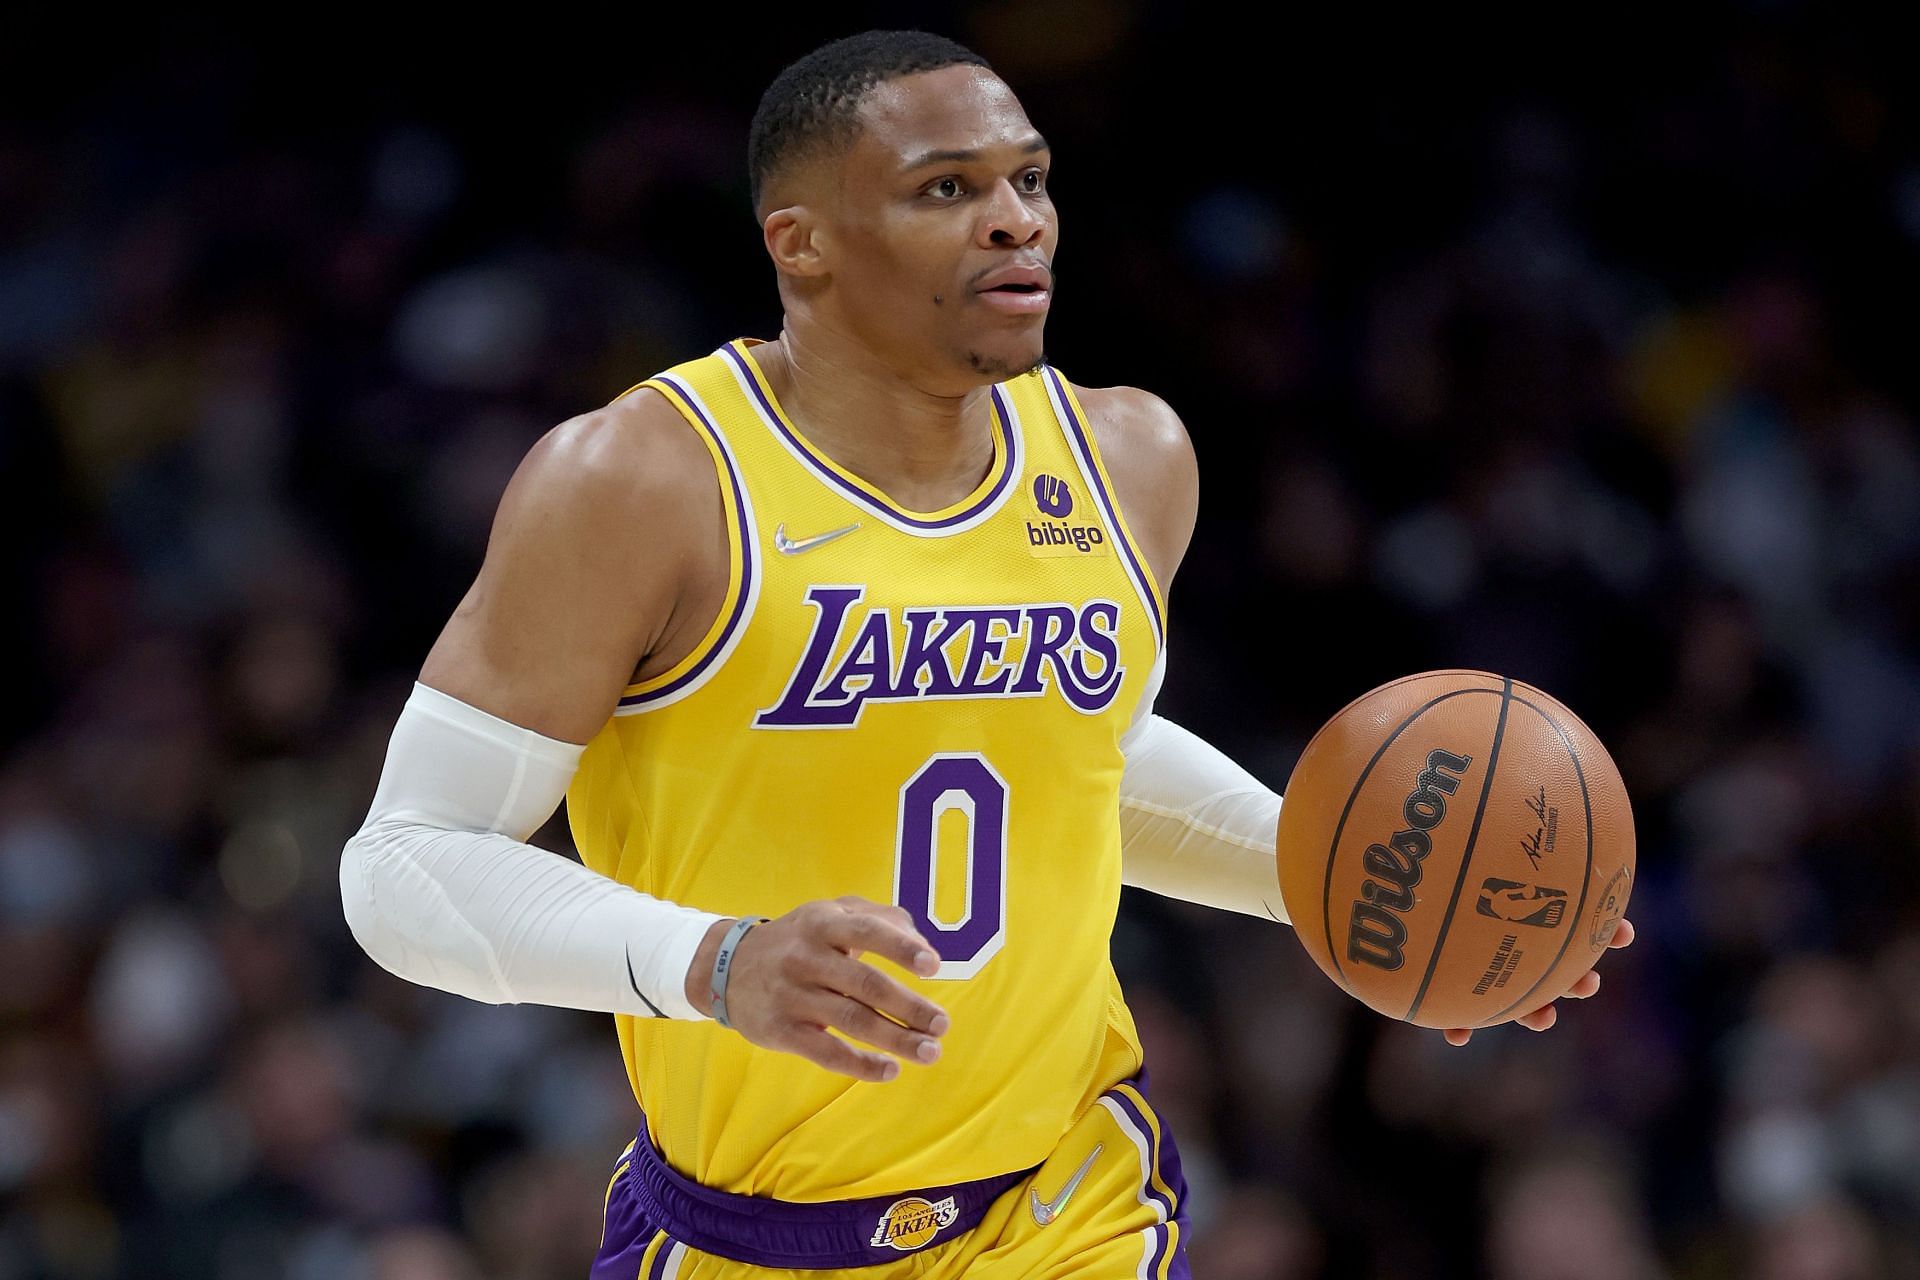 The star point guard entertained LA Lakers fans with a clutch bucket and celebration against the Utah Jazz.